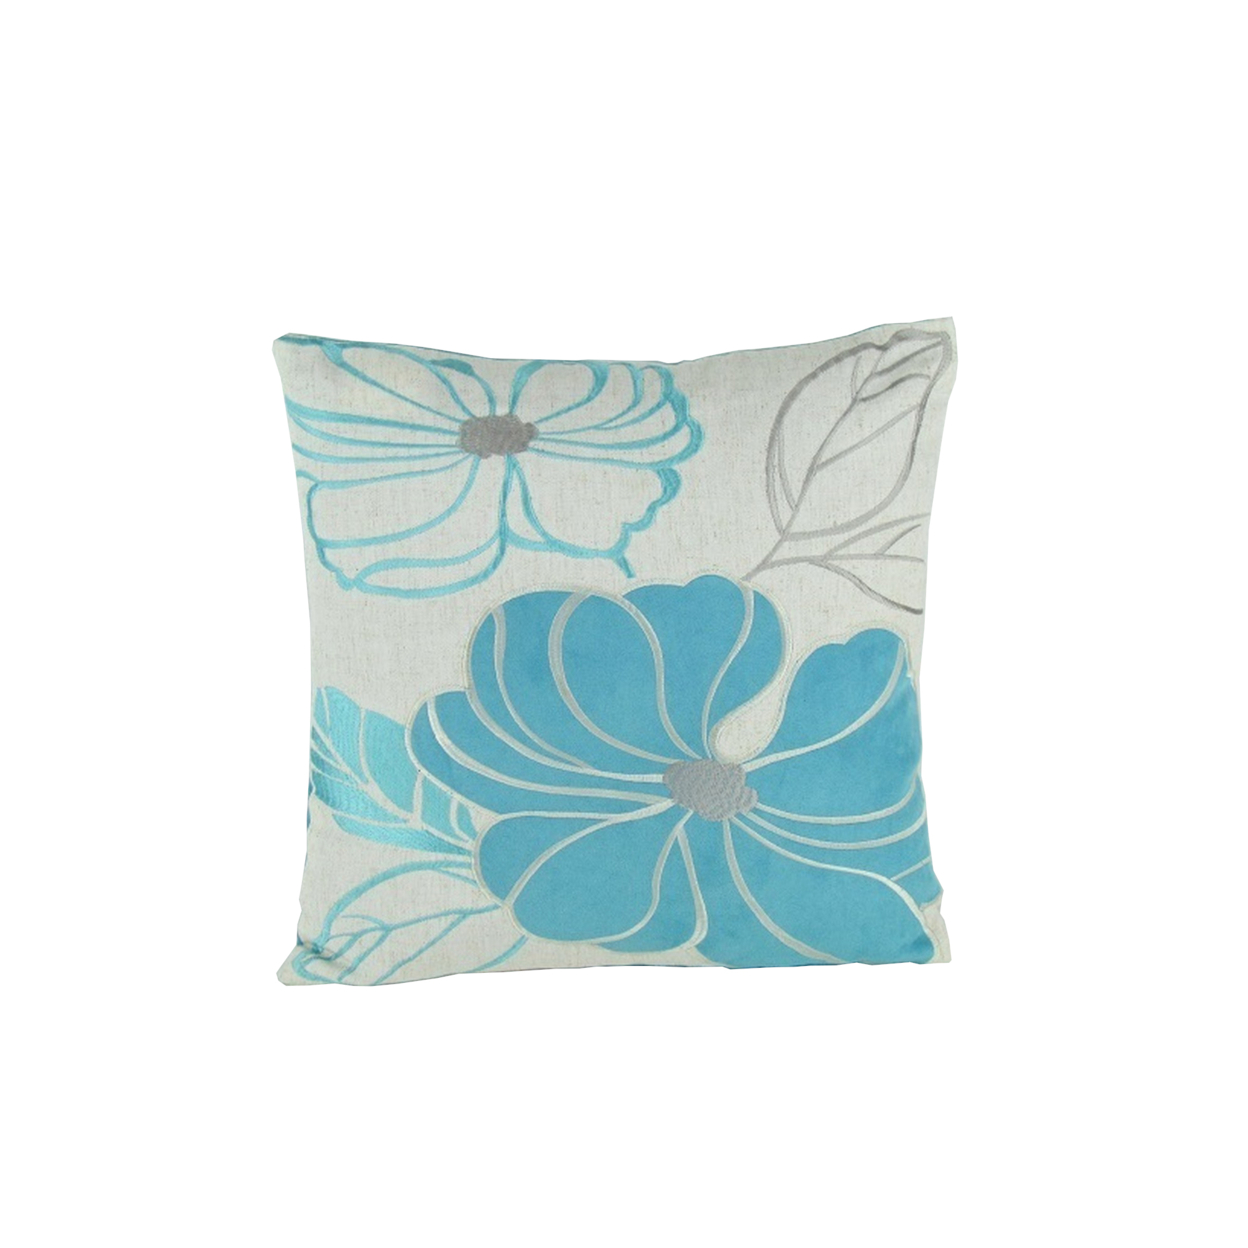 Fabric Accent Pillow With Floral Pattern, Blue And White- Saltoro Sherpi